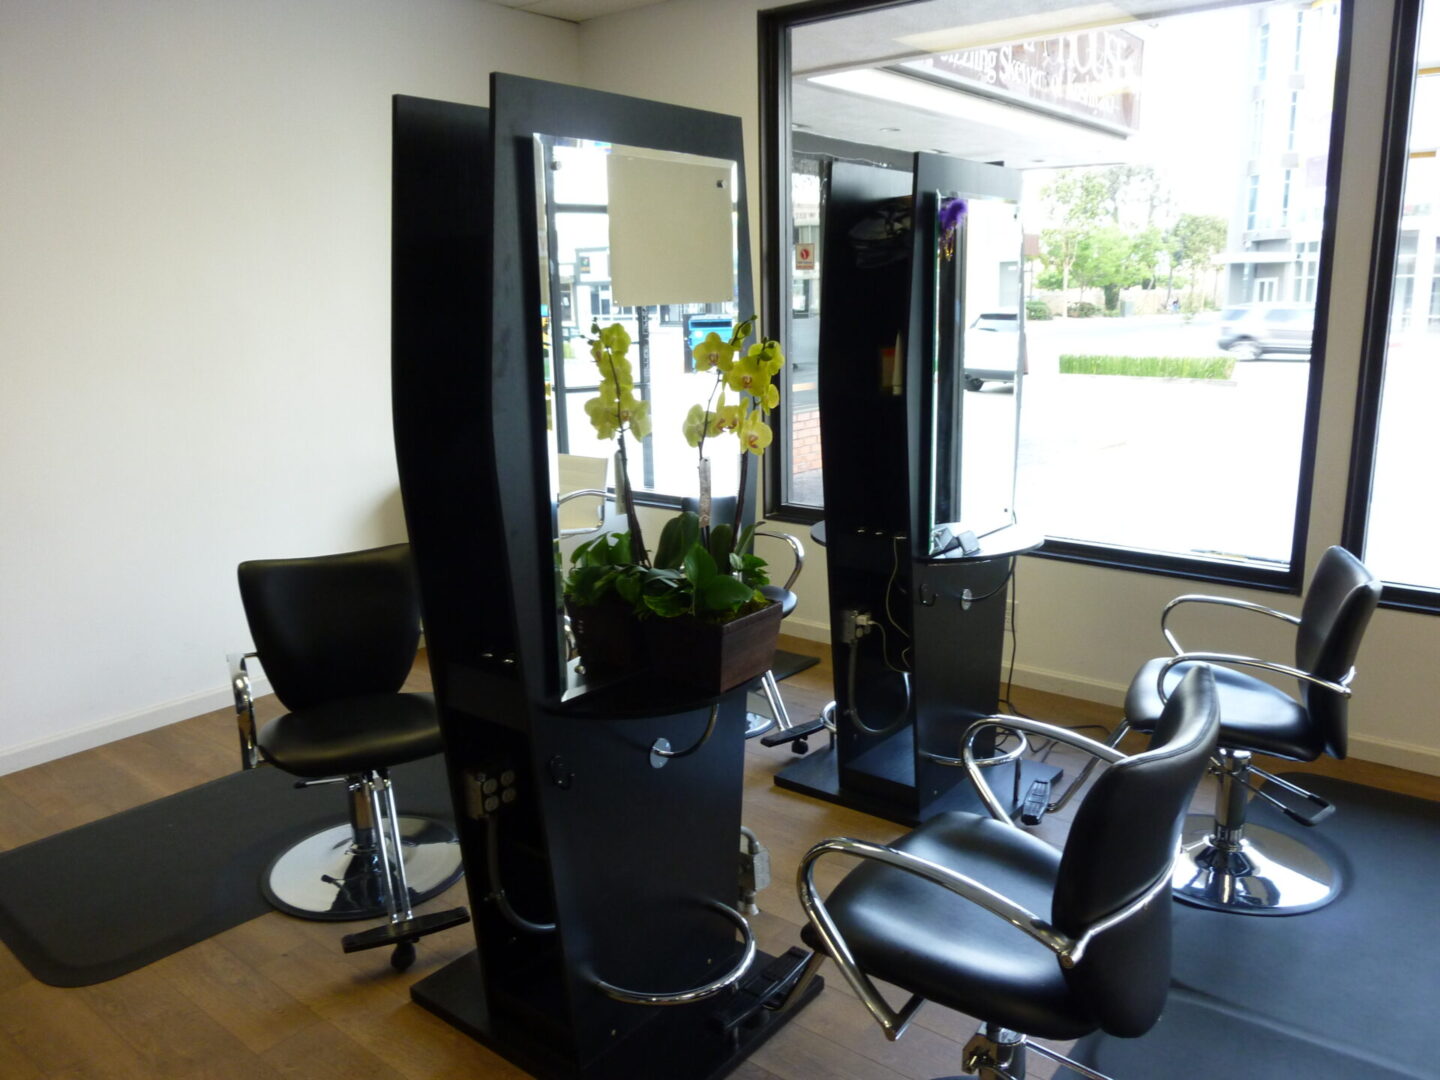 A salon with black chairs and mirrors in it